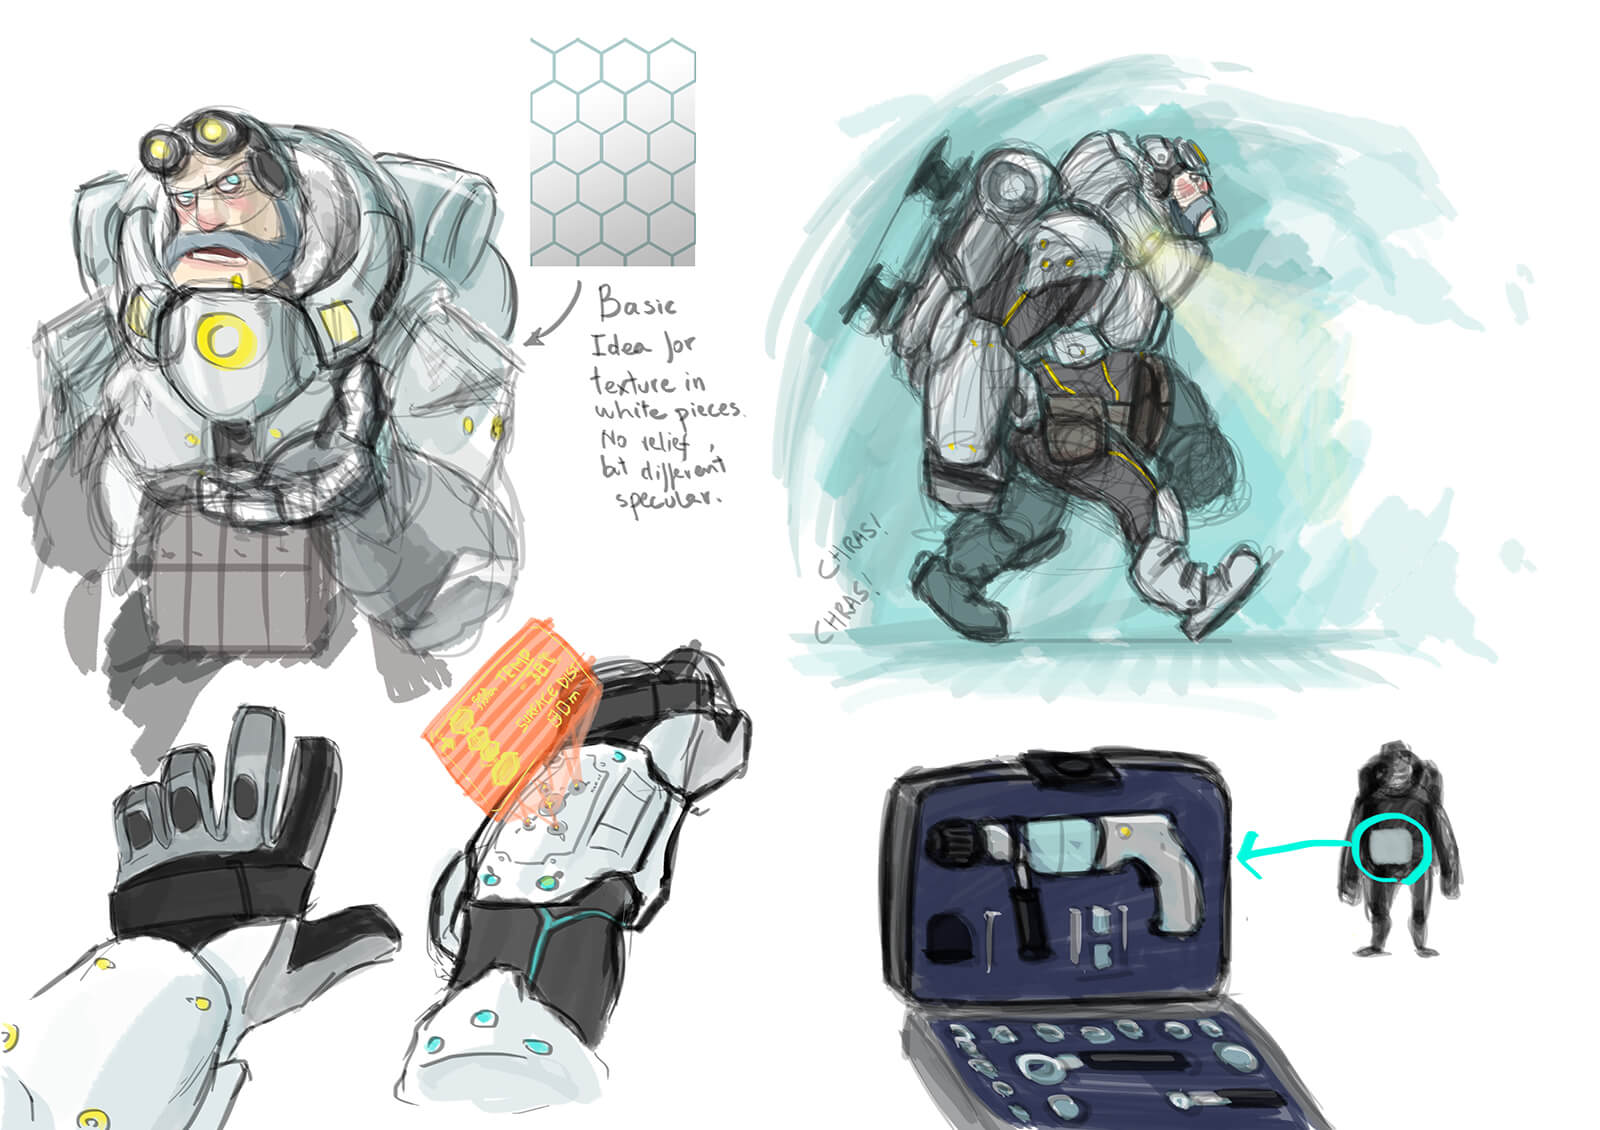 Color sketches of a bearded man in futuristic armor and goggles with details of various equipment on the armor